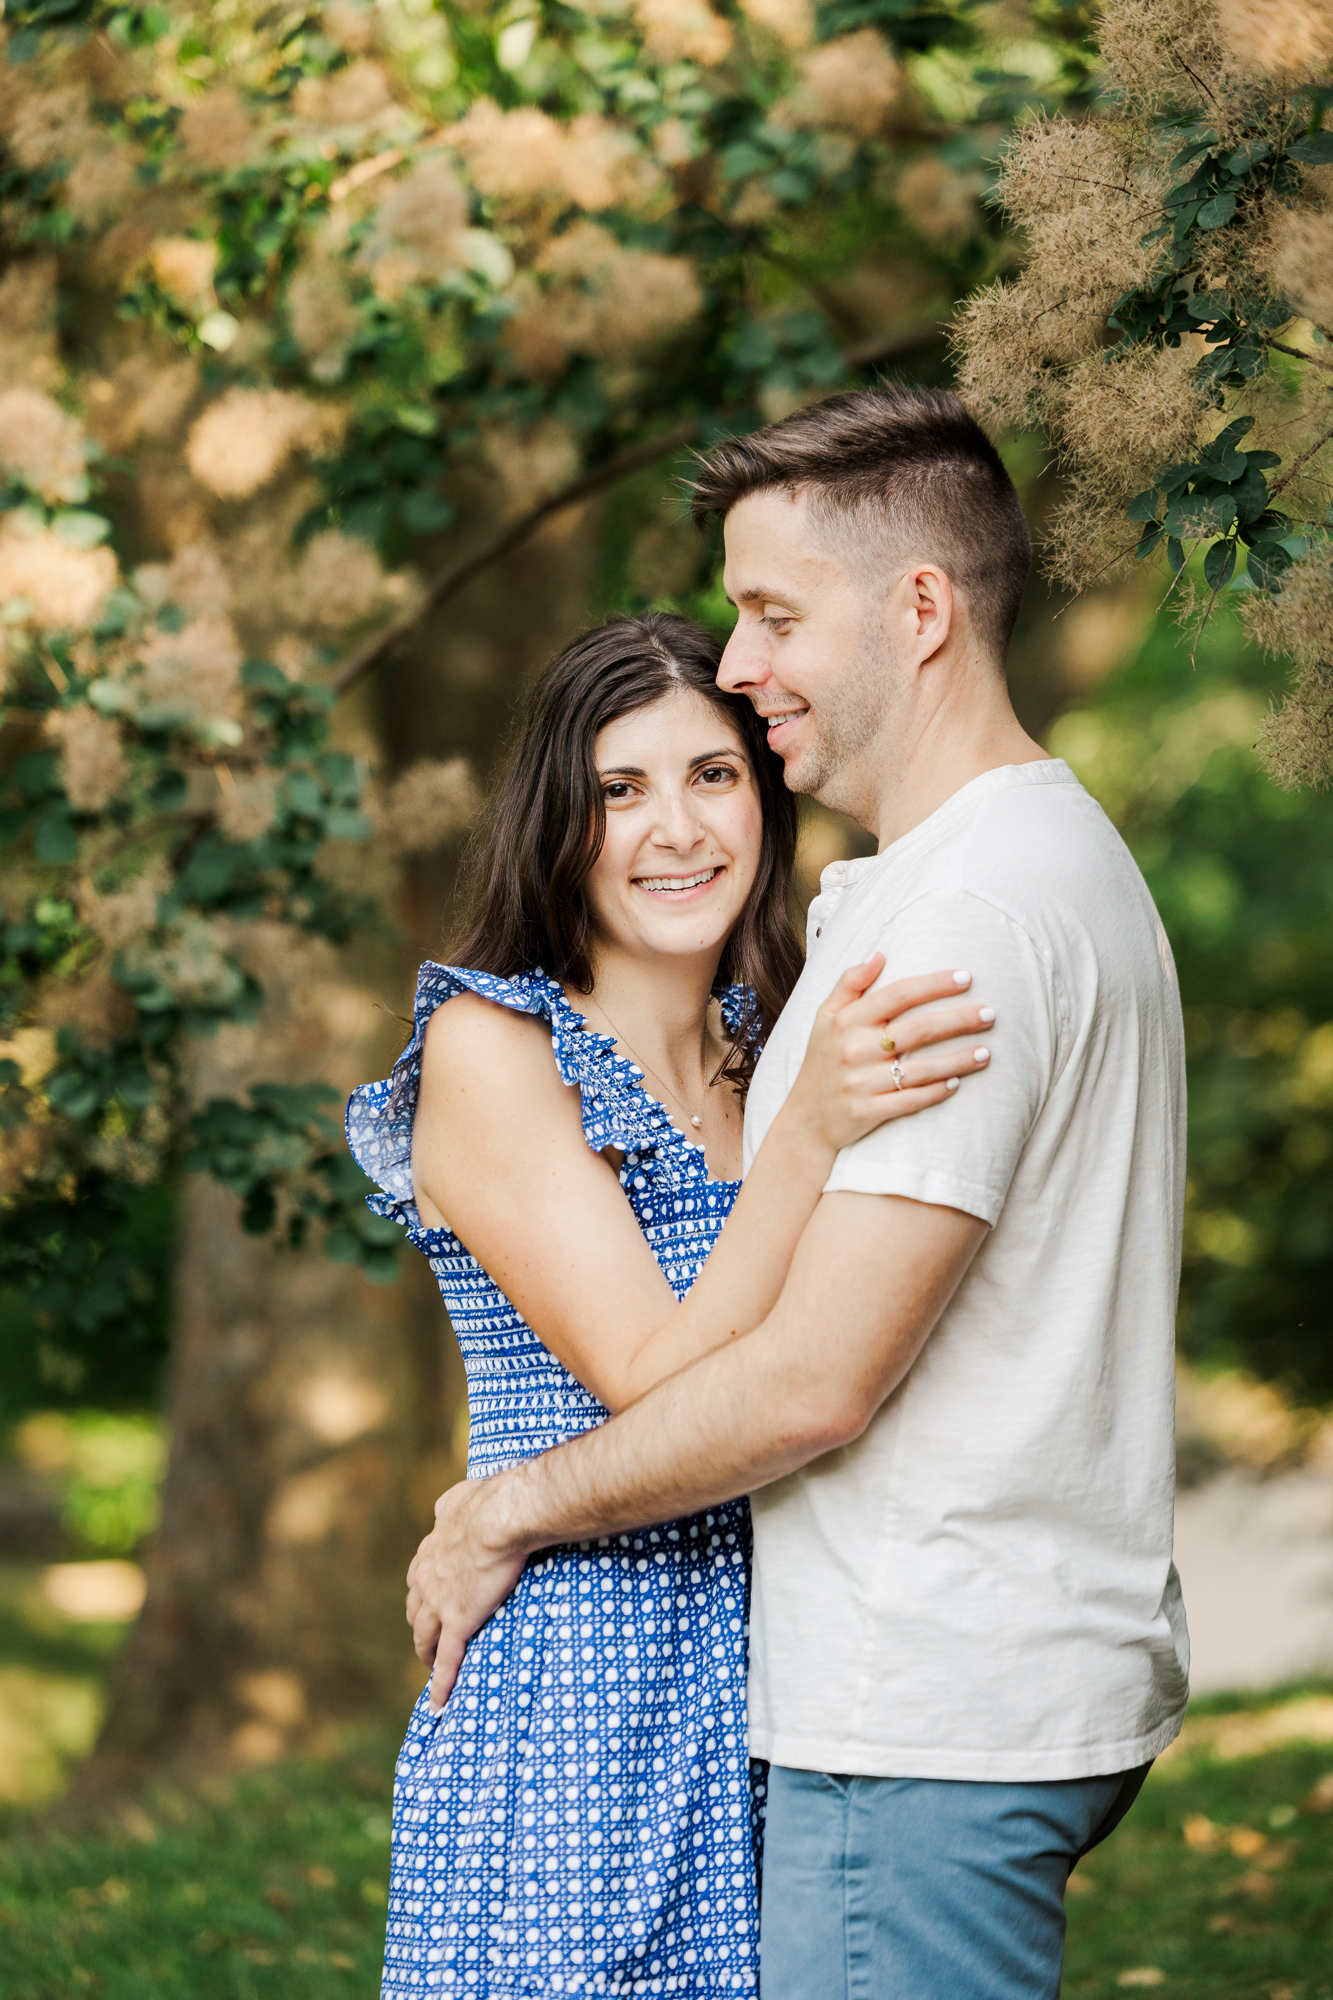 Charming engagement session in Prospect Park